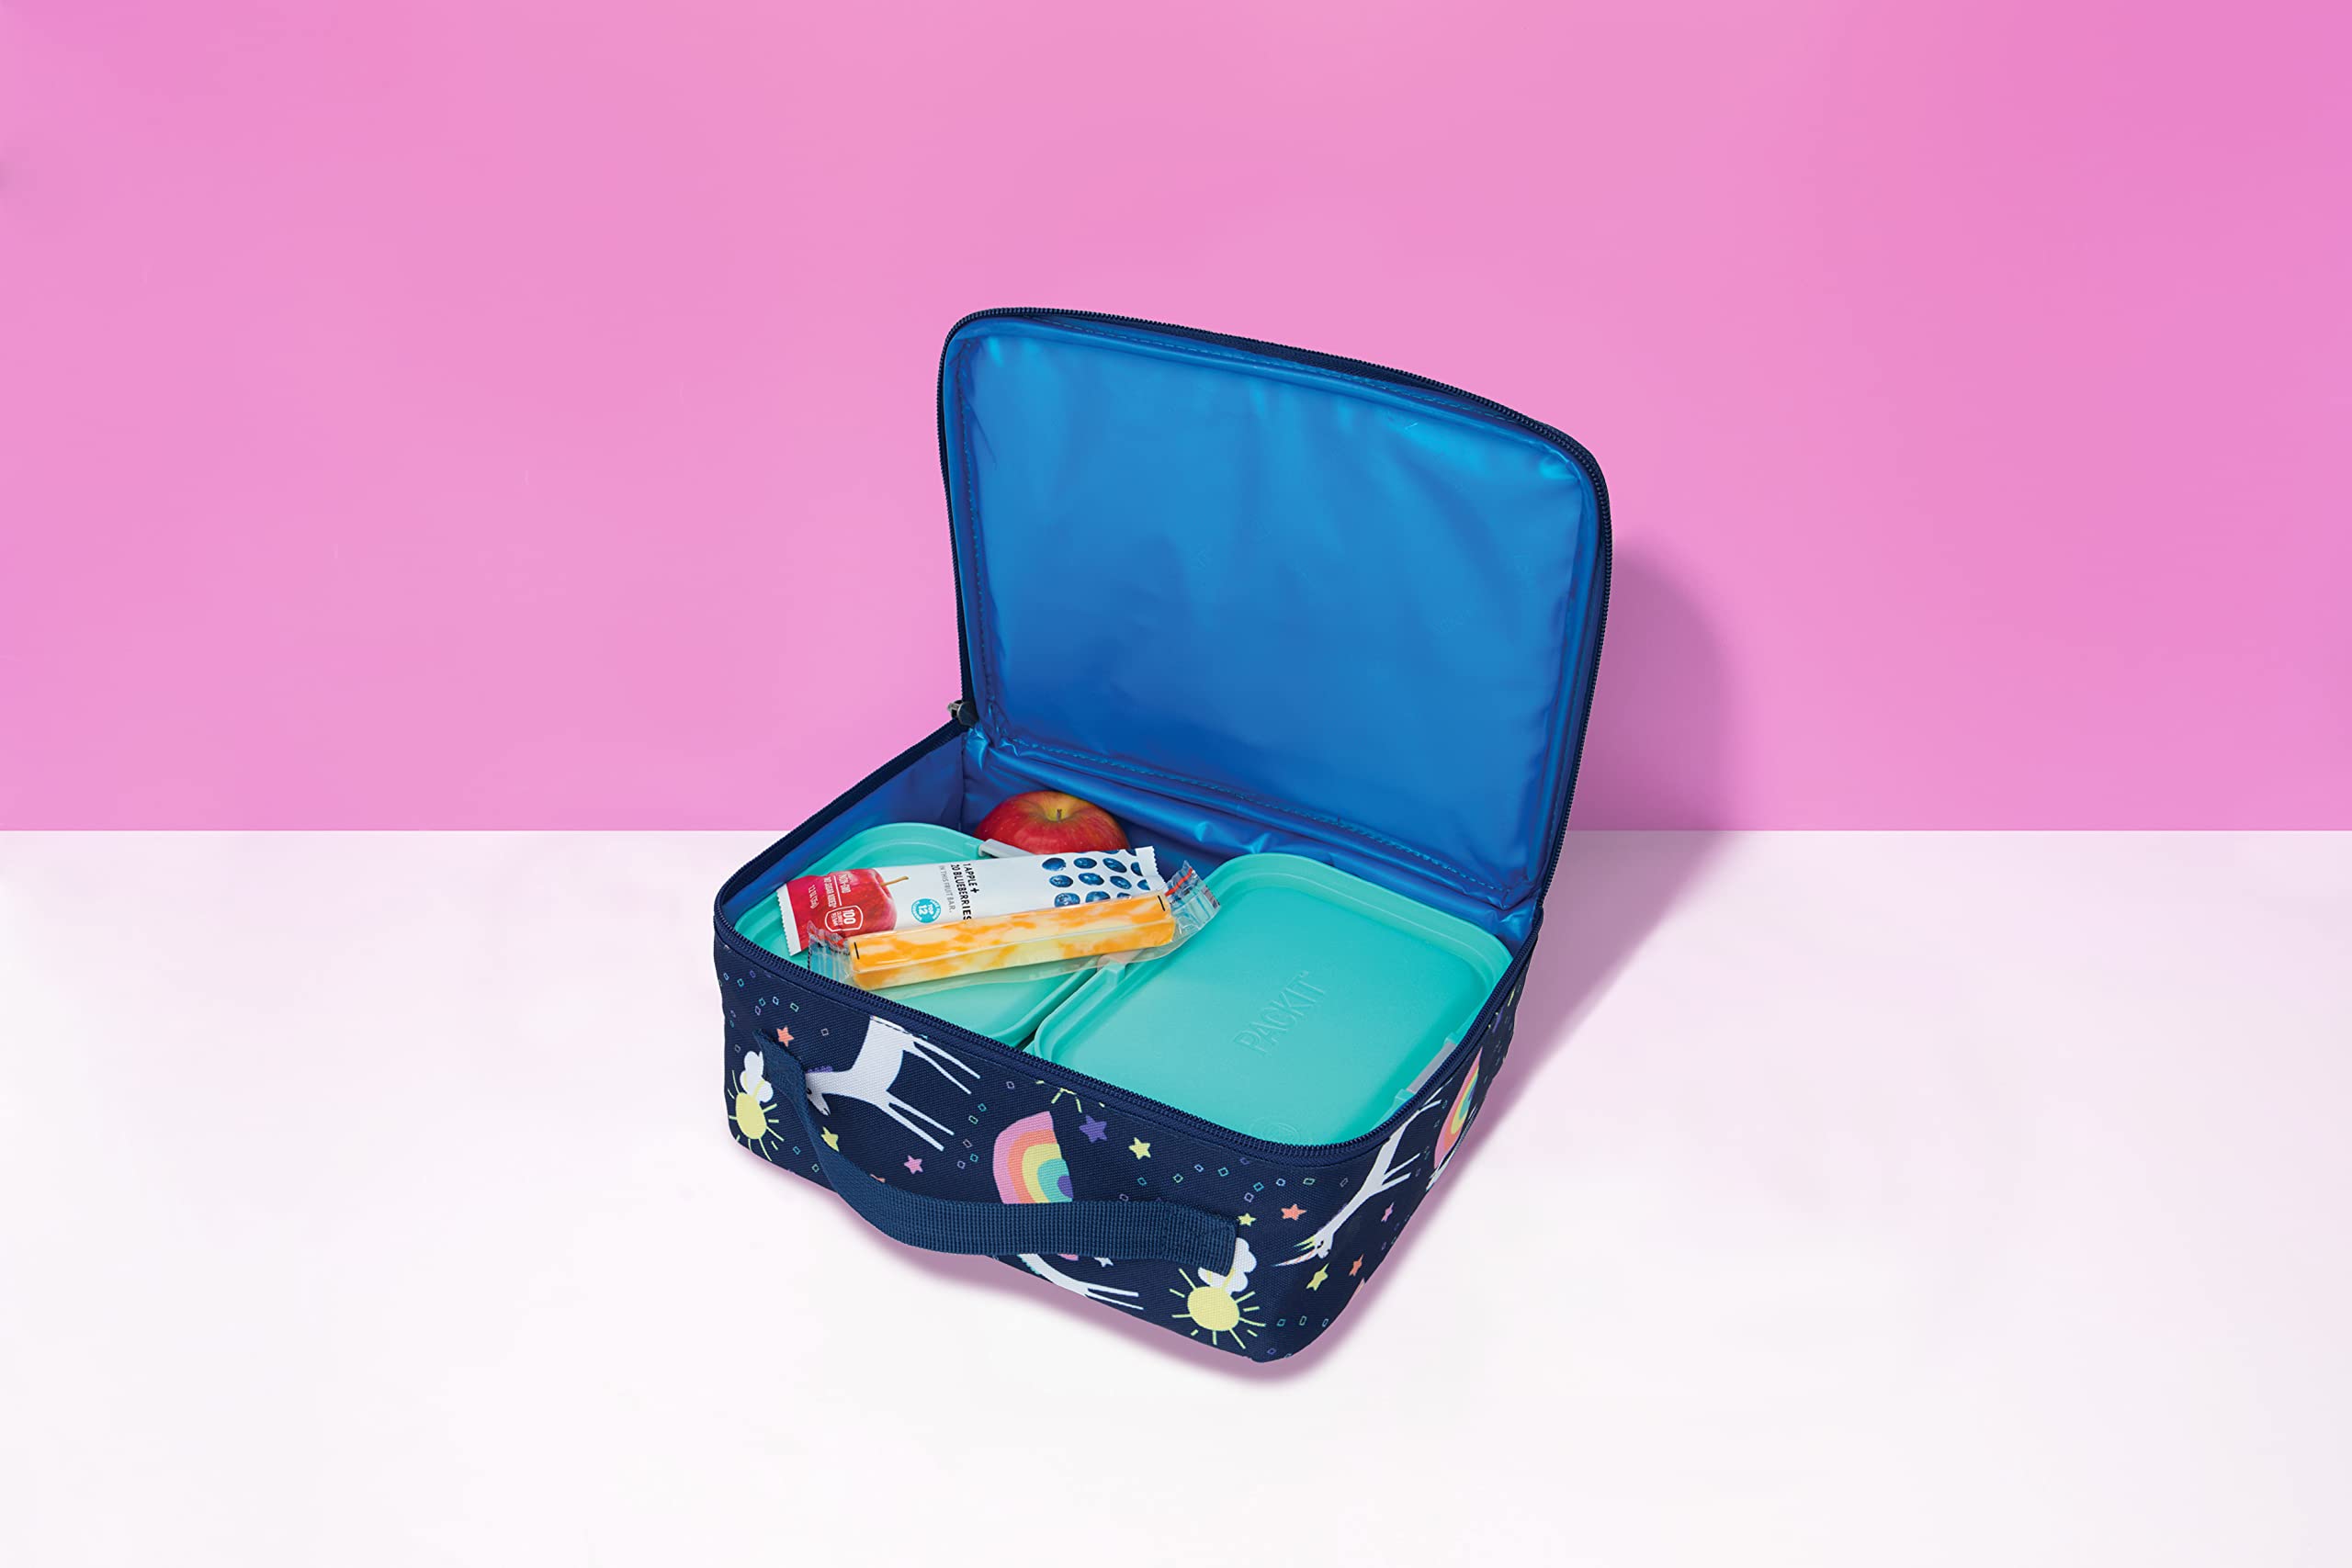 PackIt Freezable Classic Lunch Box, Unicorn Sky Navy, Built with EcoFreeze Technology, Collapsible, Reusable, Zip Closure With Zip Front Pocket and Buckle Handle, Great for Lunches